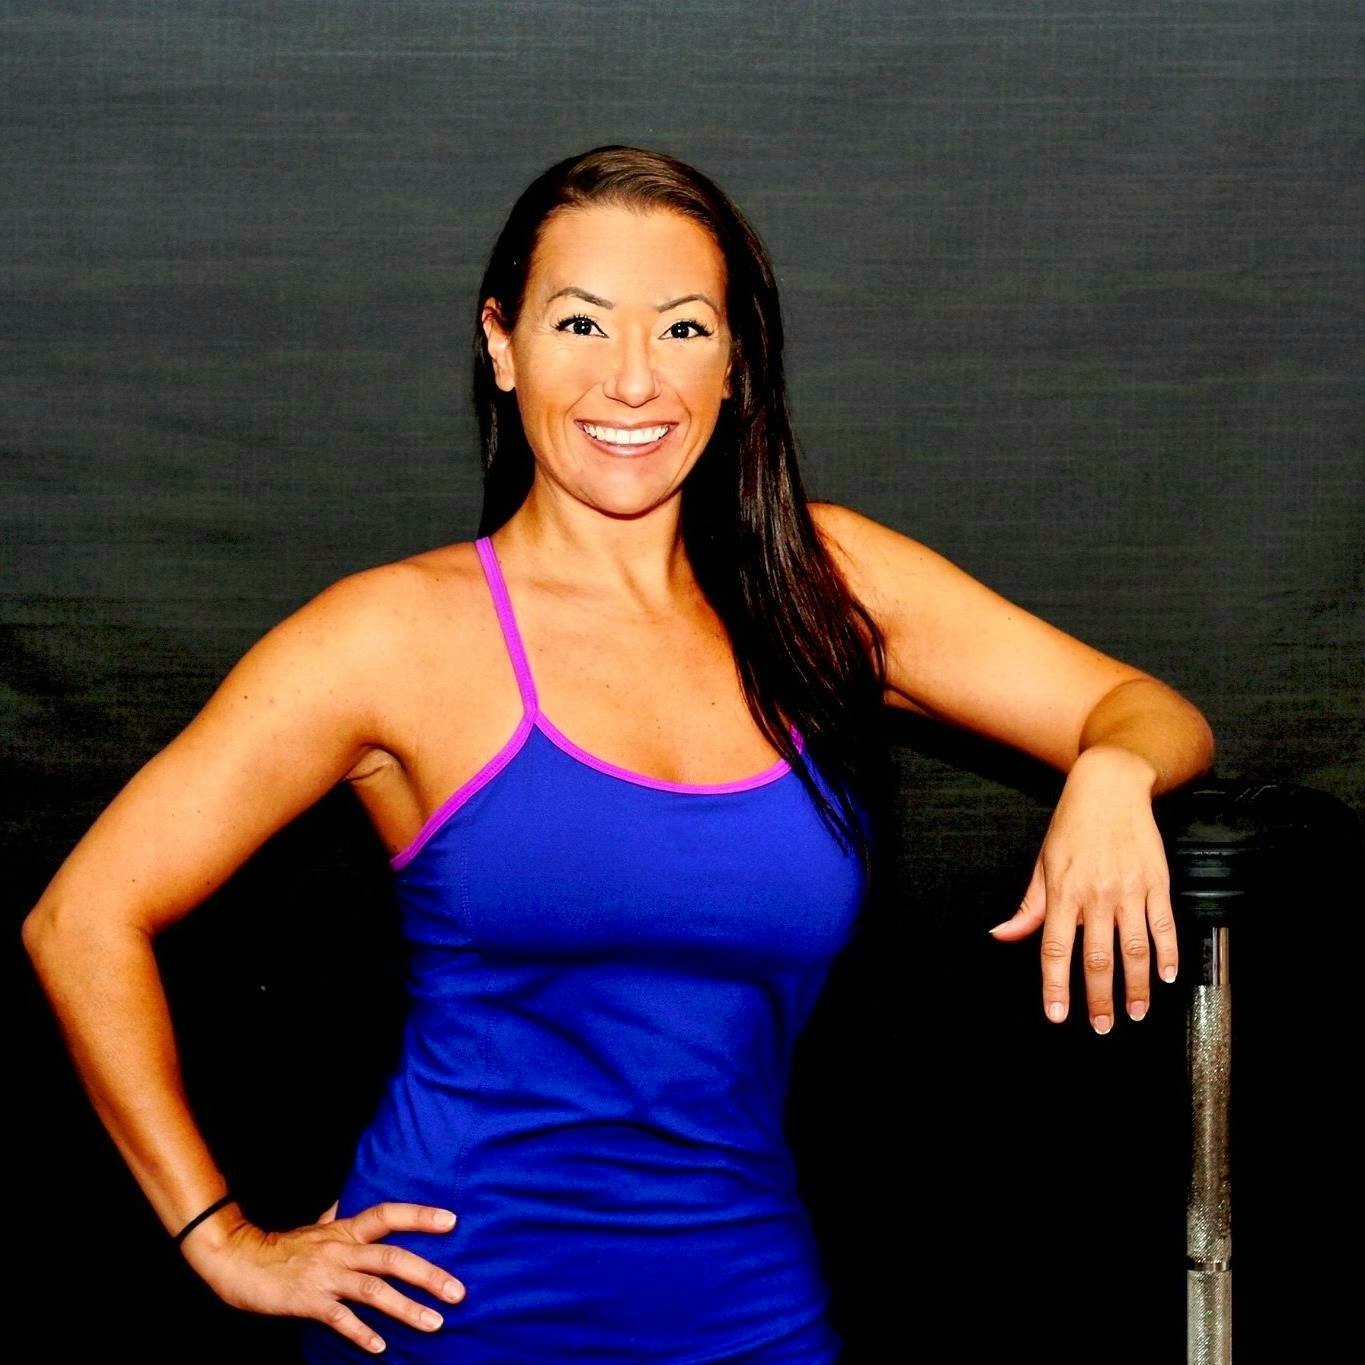 Mandie S Personal Trainer In Austin TX With FitnessTrainer